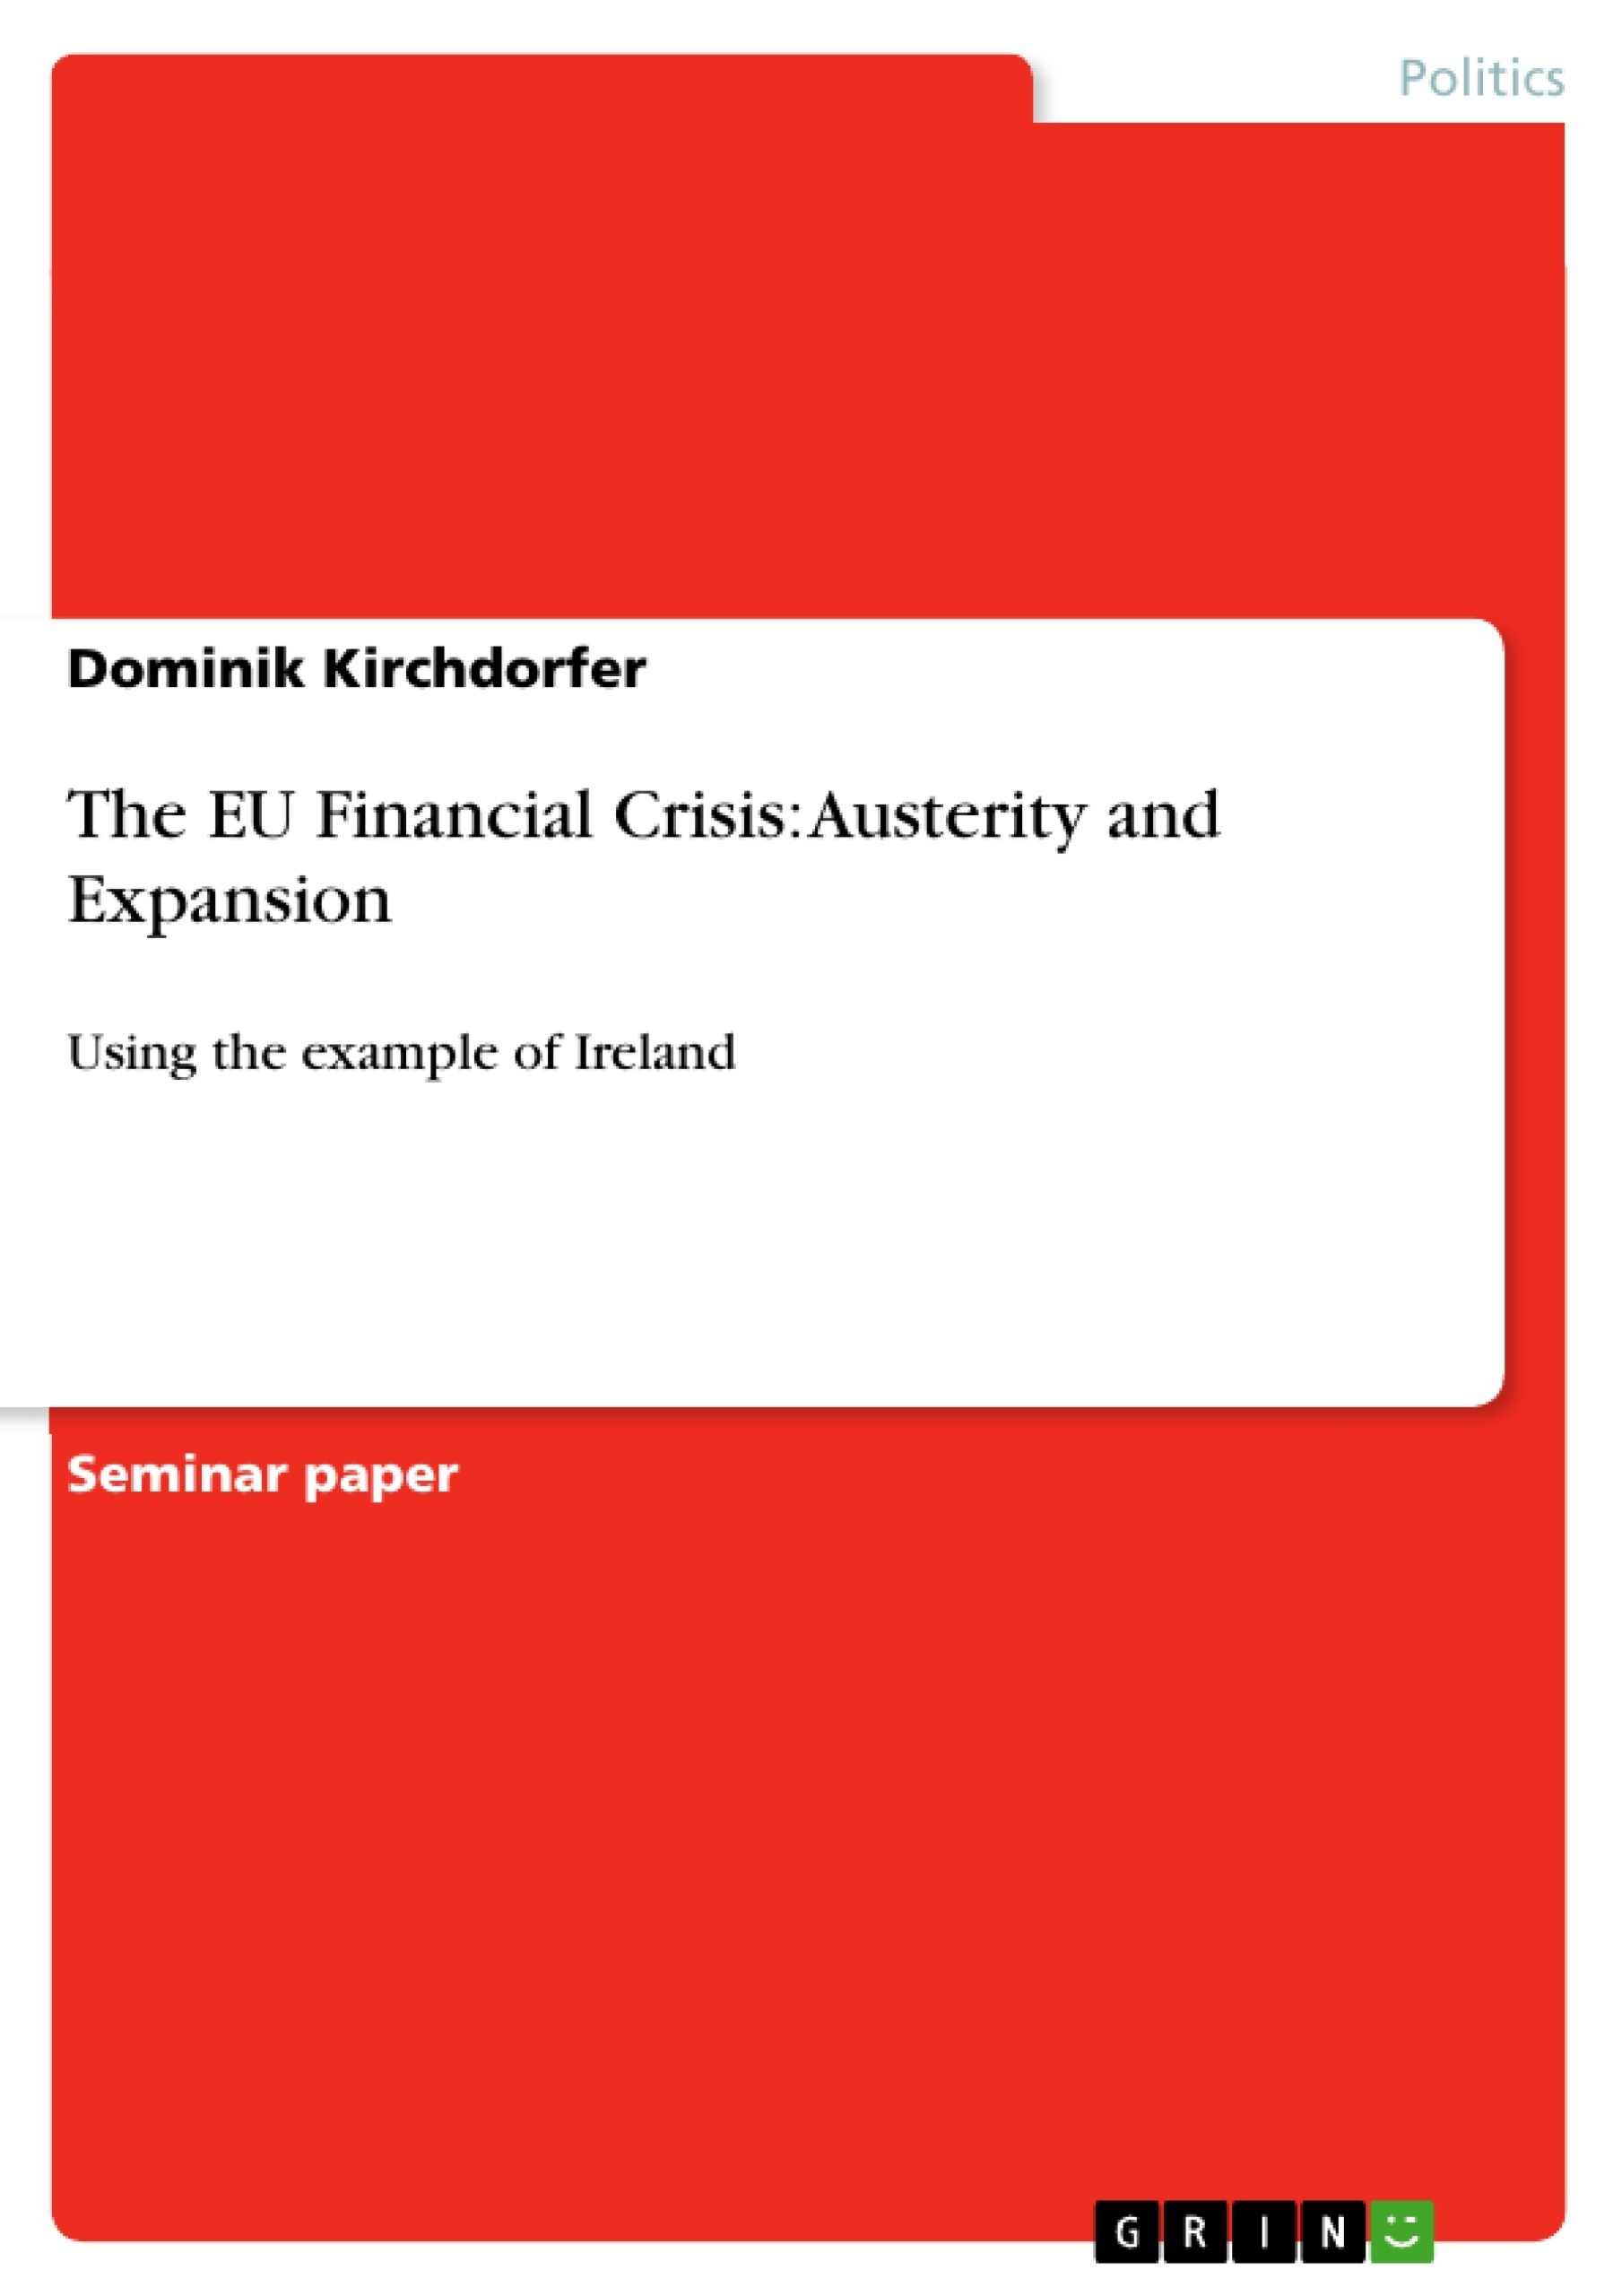 Titel: The EU Financial Crisis: Austerity and Expansion